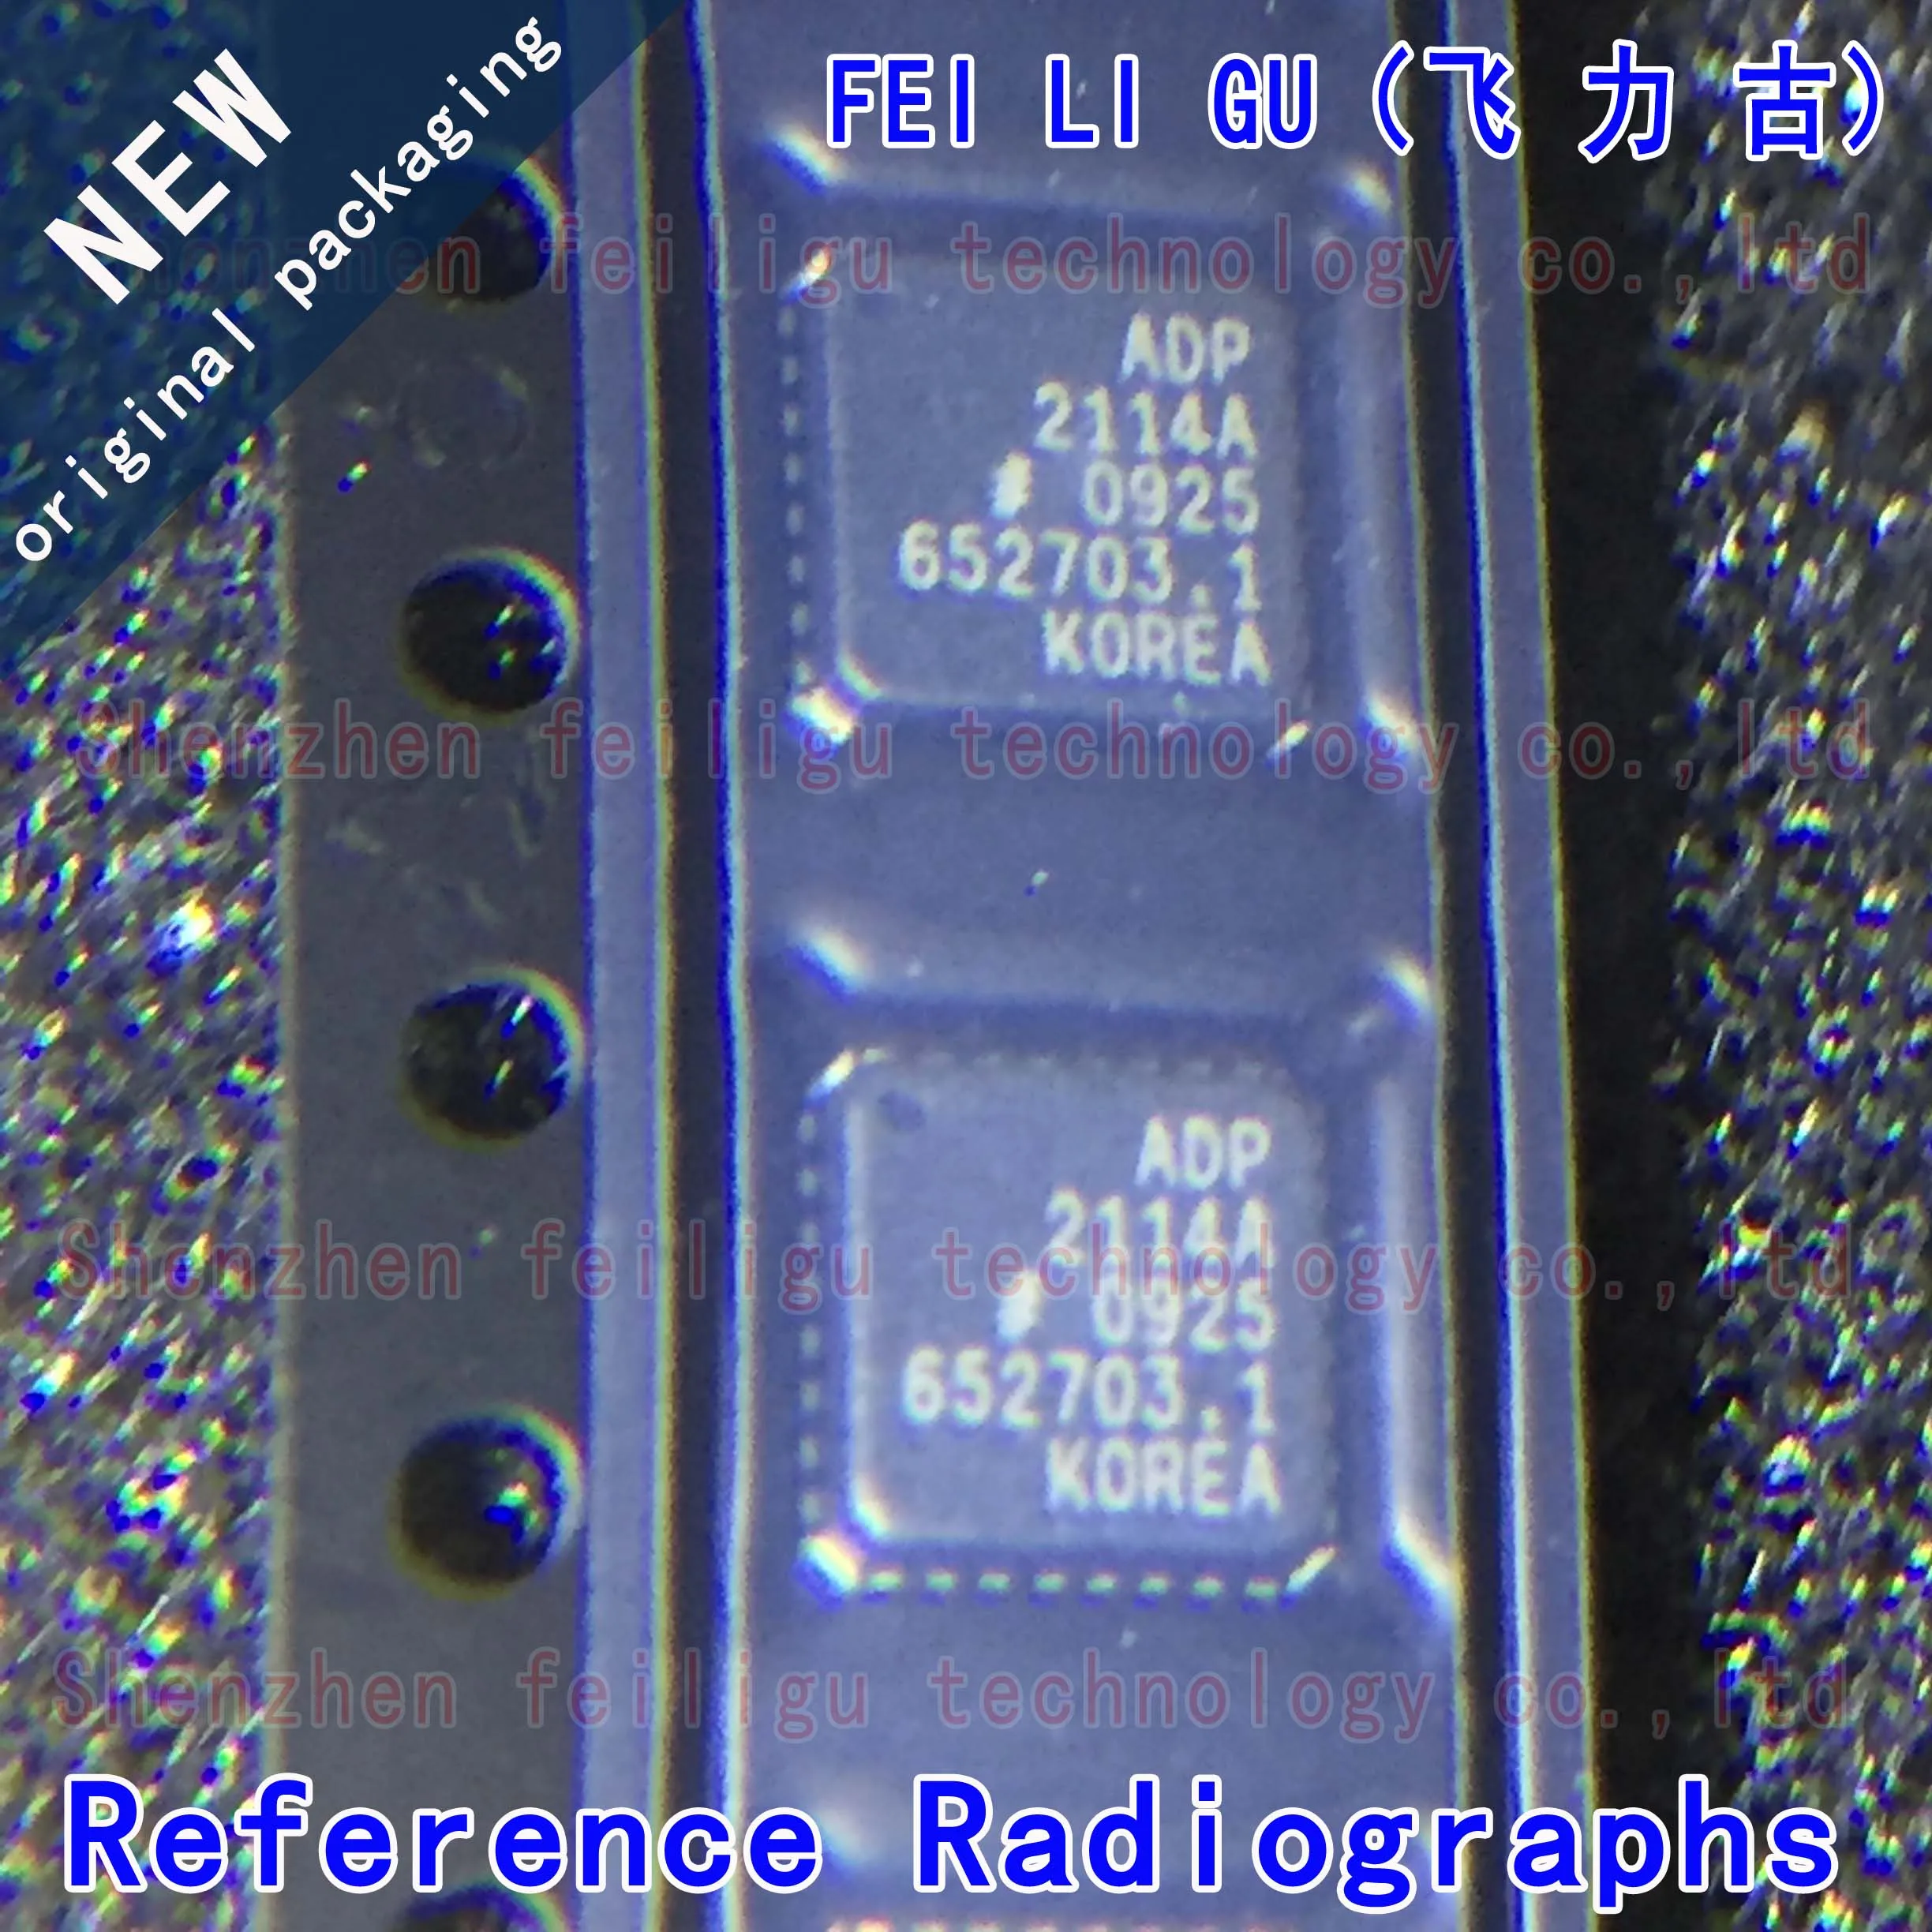 100% New Original ADP2114ACPZ-R7 ADP2114ACPZ ADP2114ACP ADP2114A ADP2114 Package:LFCSP32 Buck Switching Regulator Chip 1pcs 50pcs lot adf4350 adf4350abcpz adf4350abcpz rl7 chip package lfcsp32 broadband frequency synthesizer chip